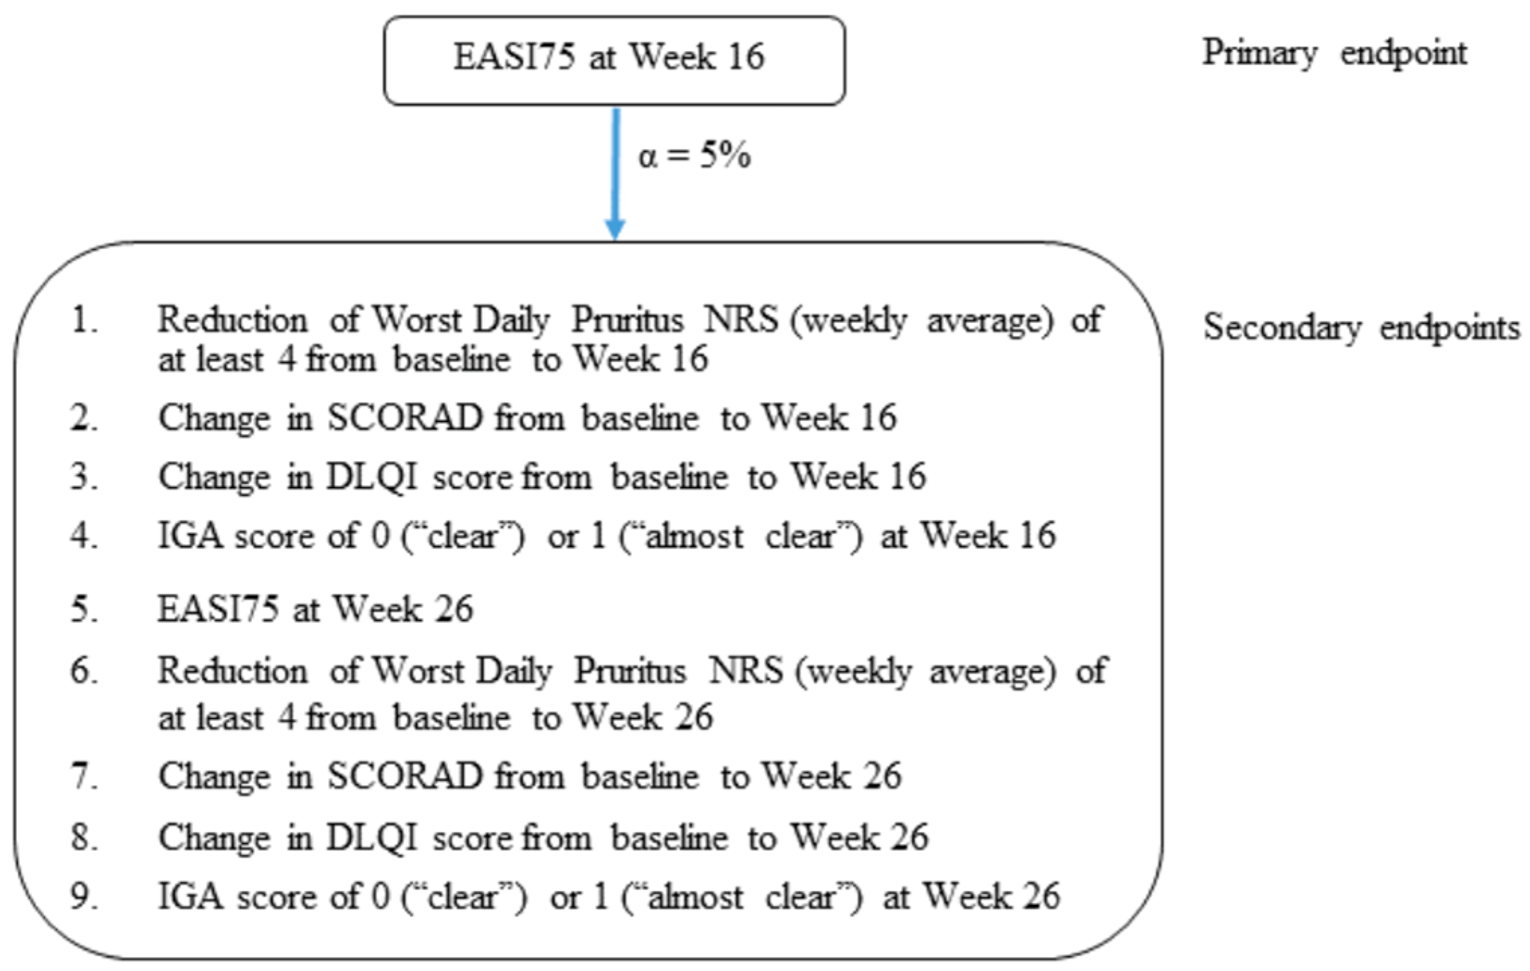 The primary and secondary end points will be evaluated hierarchically in the following order: at least a 75% reduction in Eczema Area and Severity Index score at week 16, a reduction in the worst daily pruritus numeric rating scale (weekly average) of at least 4 from baseline to week 16, a change in Scoring Atopic Dermatitis from baseline to week 16, a change in Dermatology Life Quality Index score from baseline to week 16, Investigator’s Global Assessment score of 0 (“clear”) or 1 (“almost clear”) at week 16, at least a 75% reduction in Eczema Area and Severity Index score at week 26, a reduction of worst daily pruritus numeric rating scale (weekly average) of at least 4 from baseline to week 26, a change in Scoring Atopic Dermatitis from baseline to week 26, a change in the Dermatology Life Quality Index score from baseline to week 26, and an Investigator’s Global Assessment score of 0 (“clear”) or 1 (“almost clear”) at week 26. The hypothesis relating to a specific end point cannot be rejected unless all hypotheses relating to end points earlier in the hierarchy are also rejected at the 5% significance level.